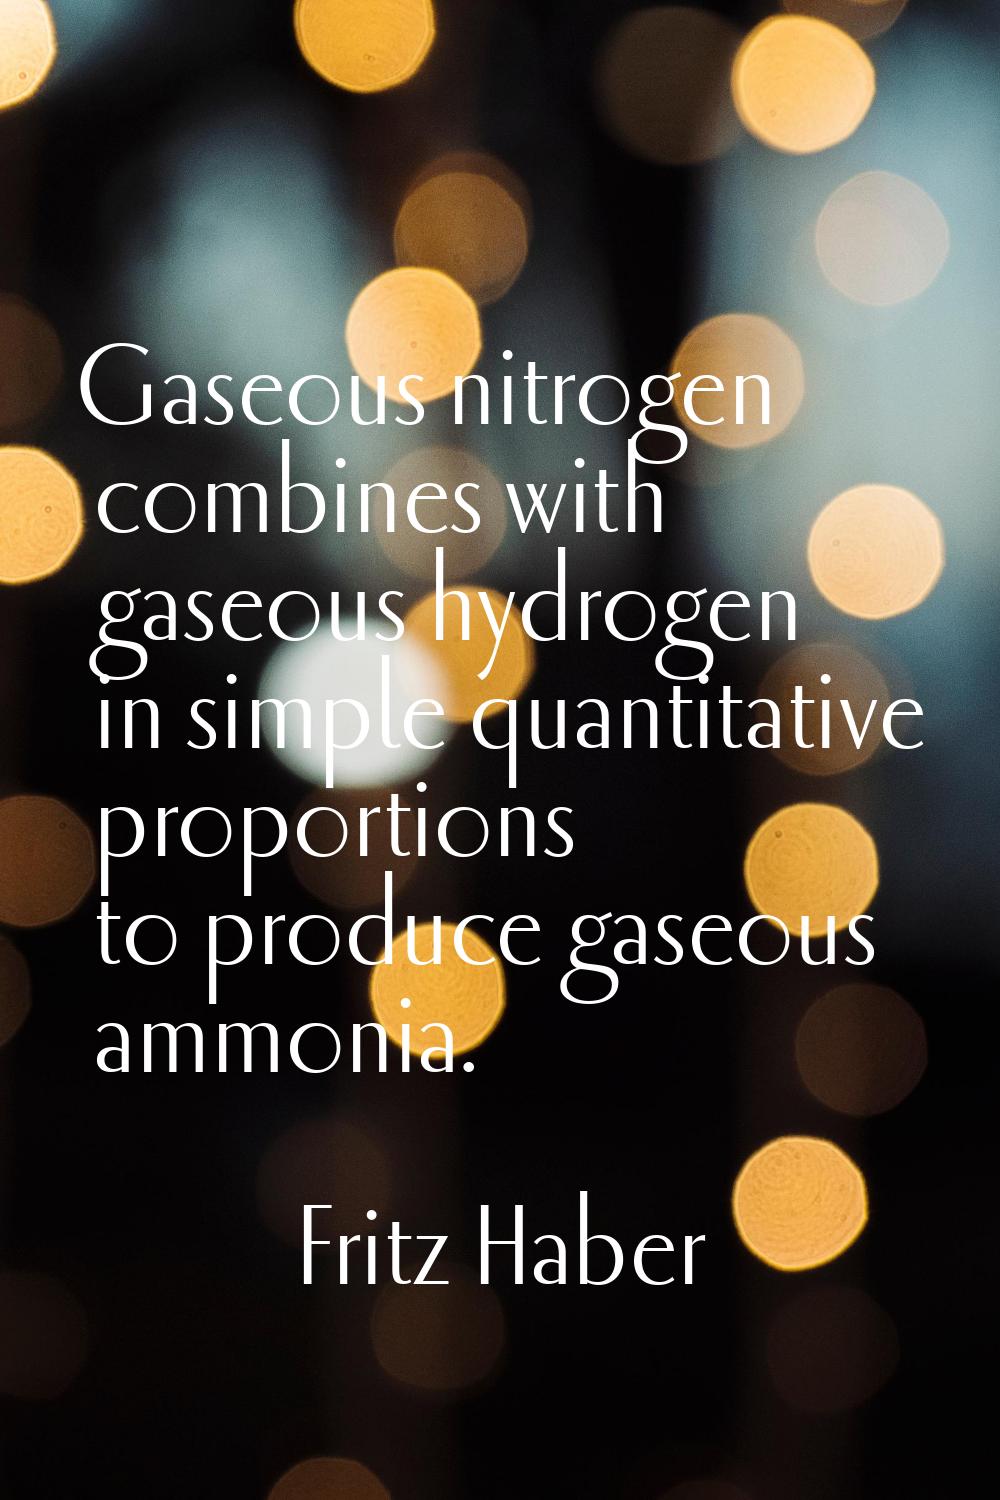 Gaseous nitrogen combines with gaseous hydrogen in simple quantitative proportions to produce gaseo